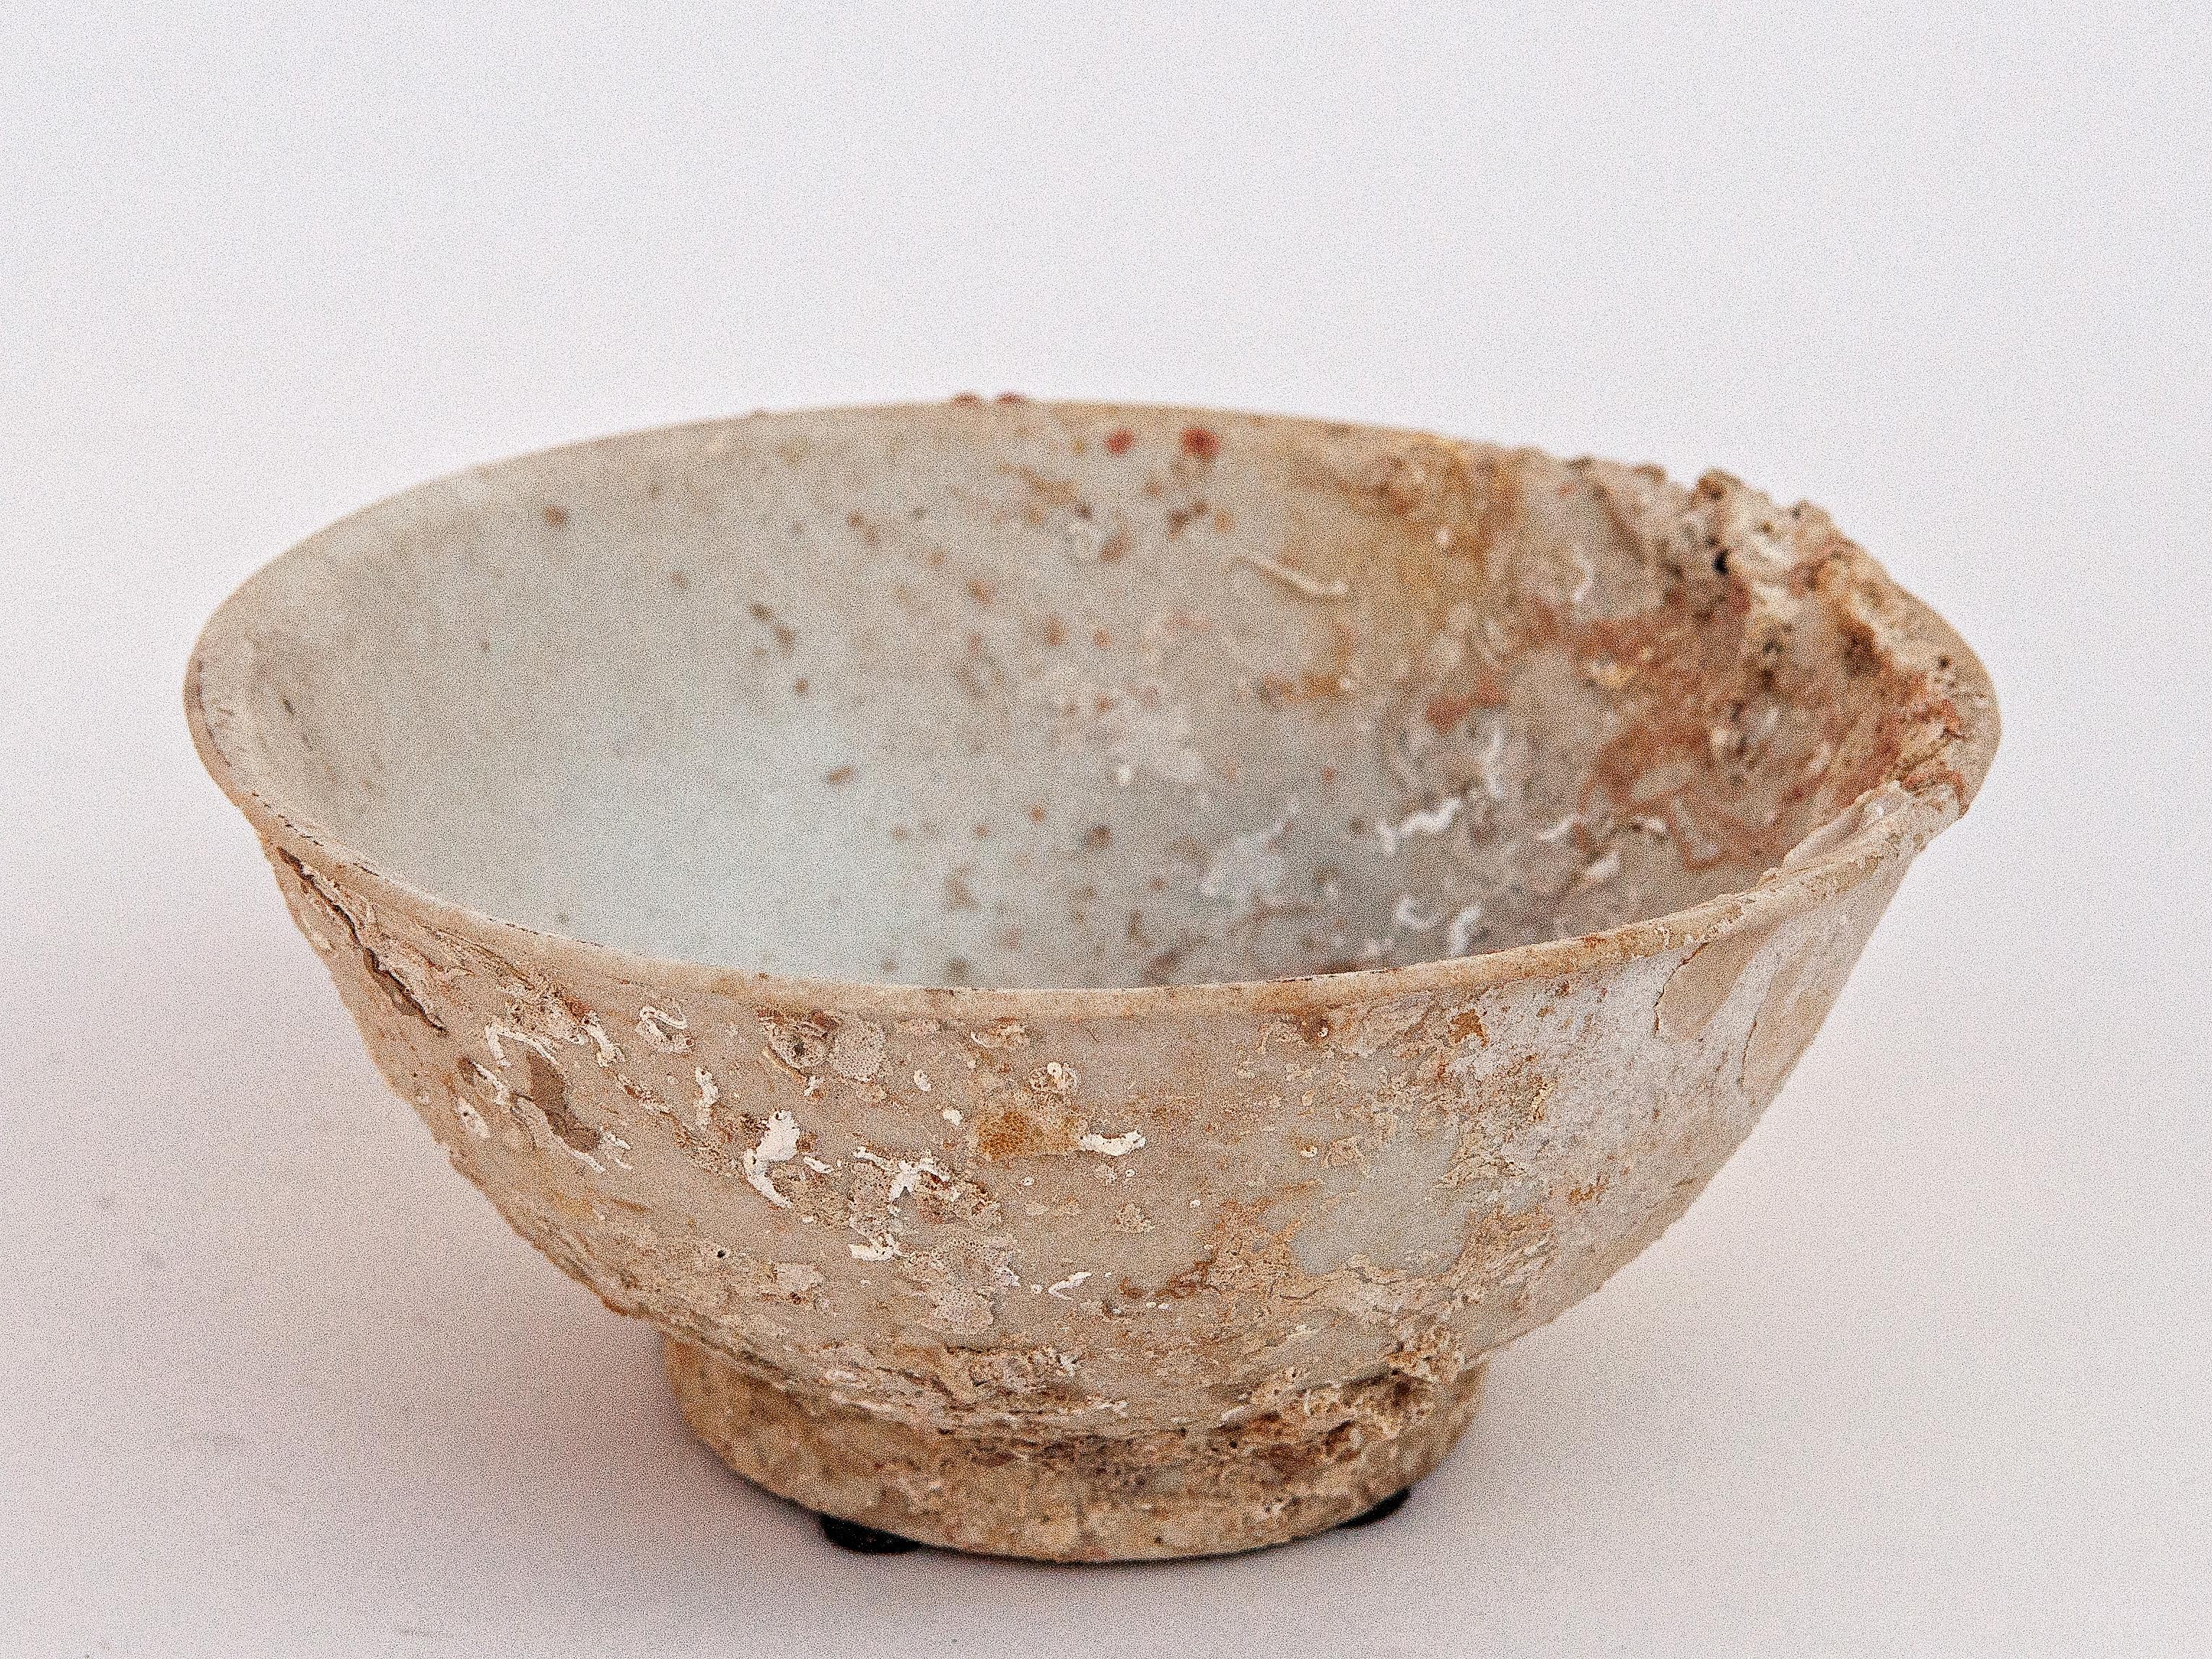 Small Song dynasty Celadon bowl with encrustations, 11th or 12th century, China.
This small ceramic bowl was salvaged from a shipwreck in the waters off the coasts of Sumatra and Malaysia. The accumulation of barnacles over many long years in the